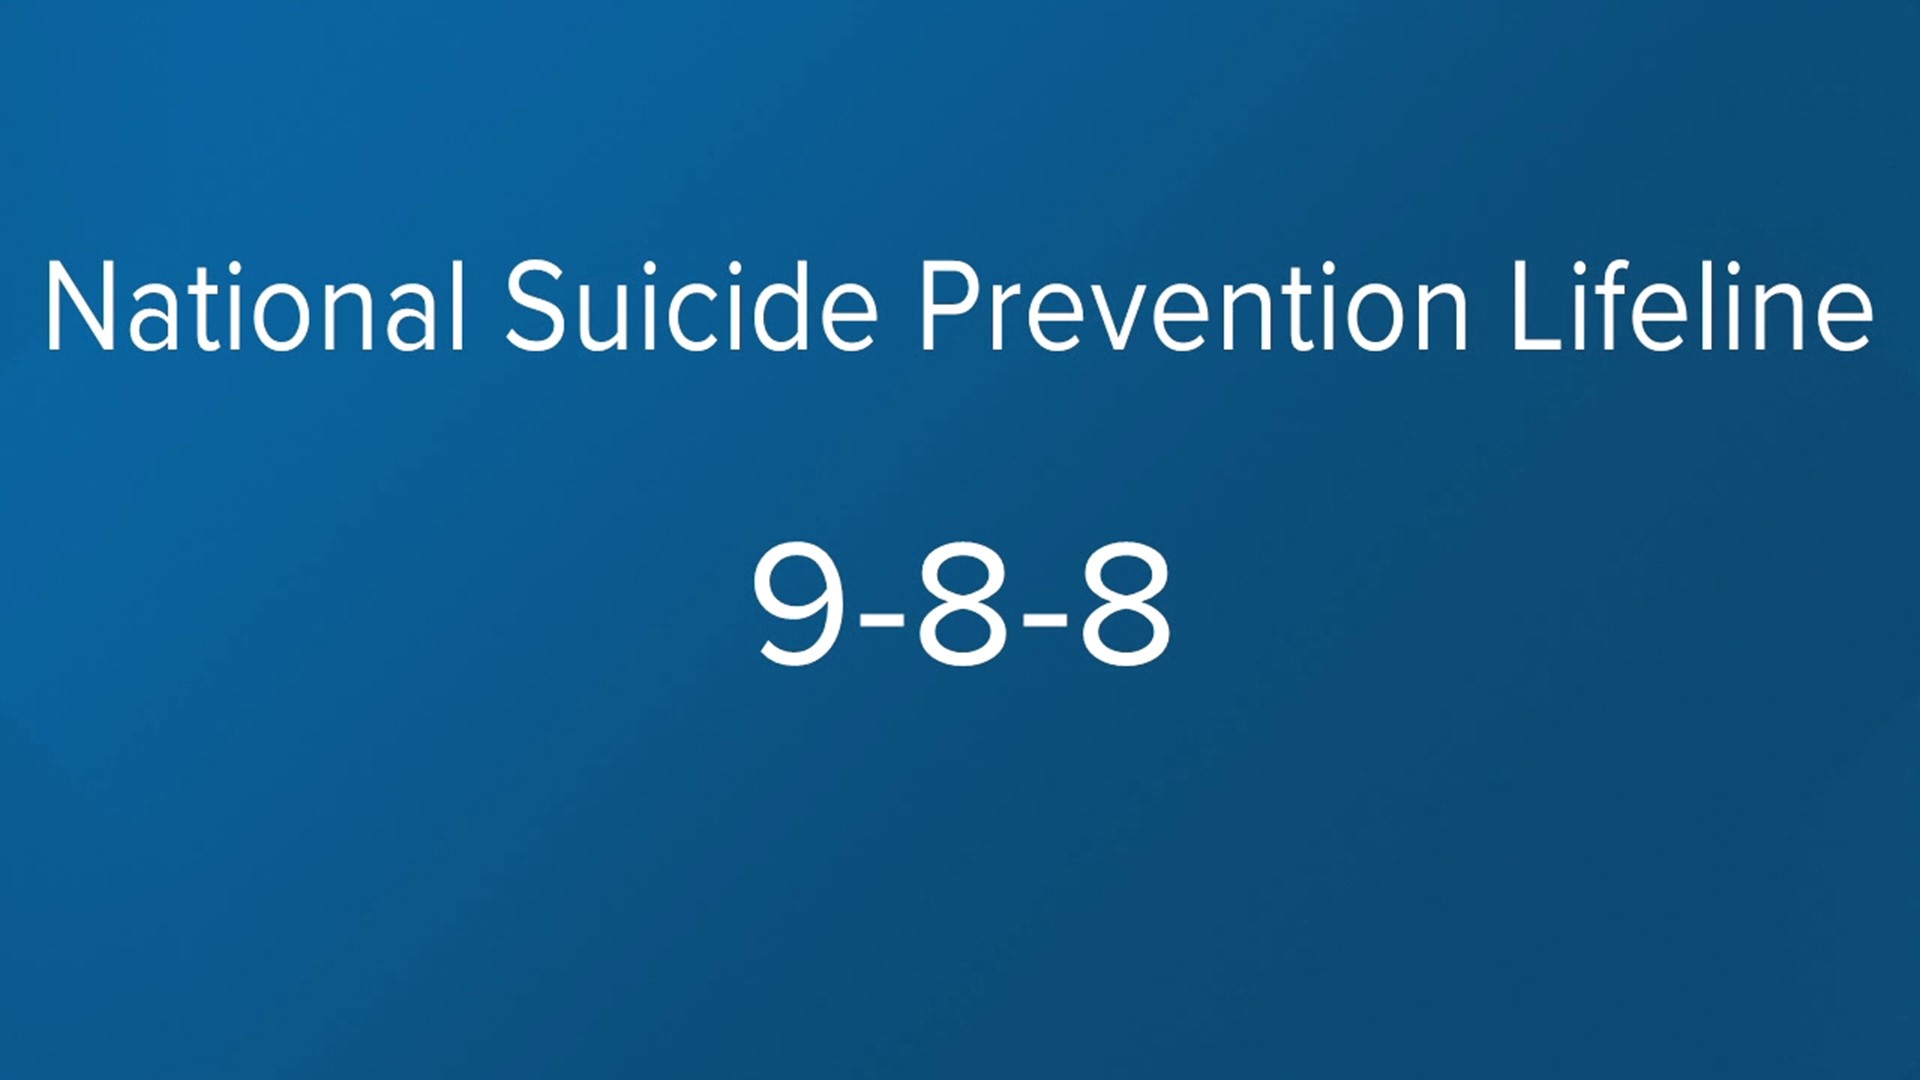 Getting help in a mental health crisis is now just three digits away.